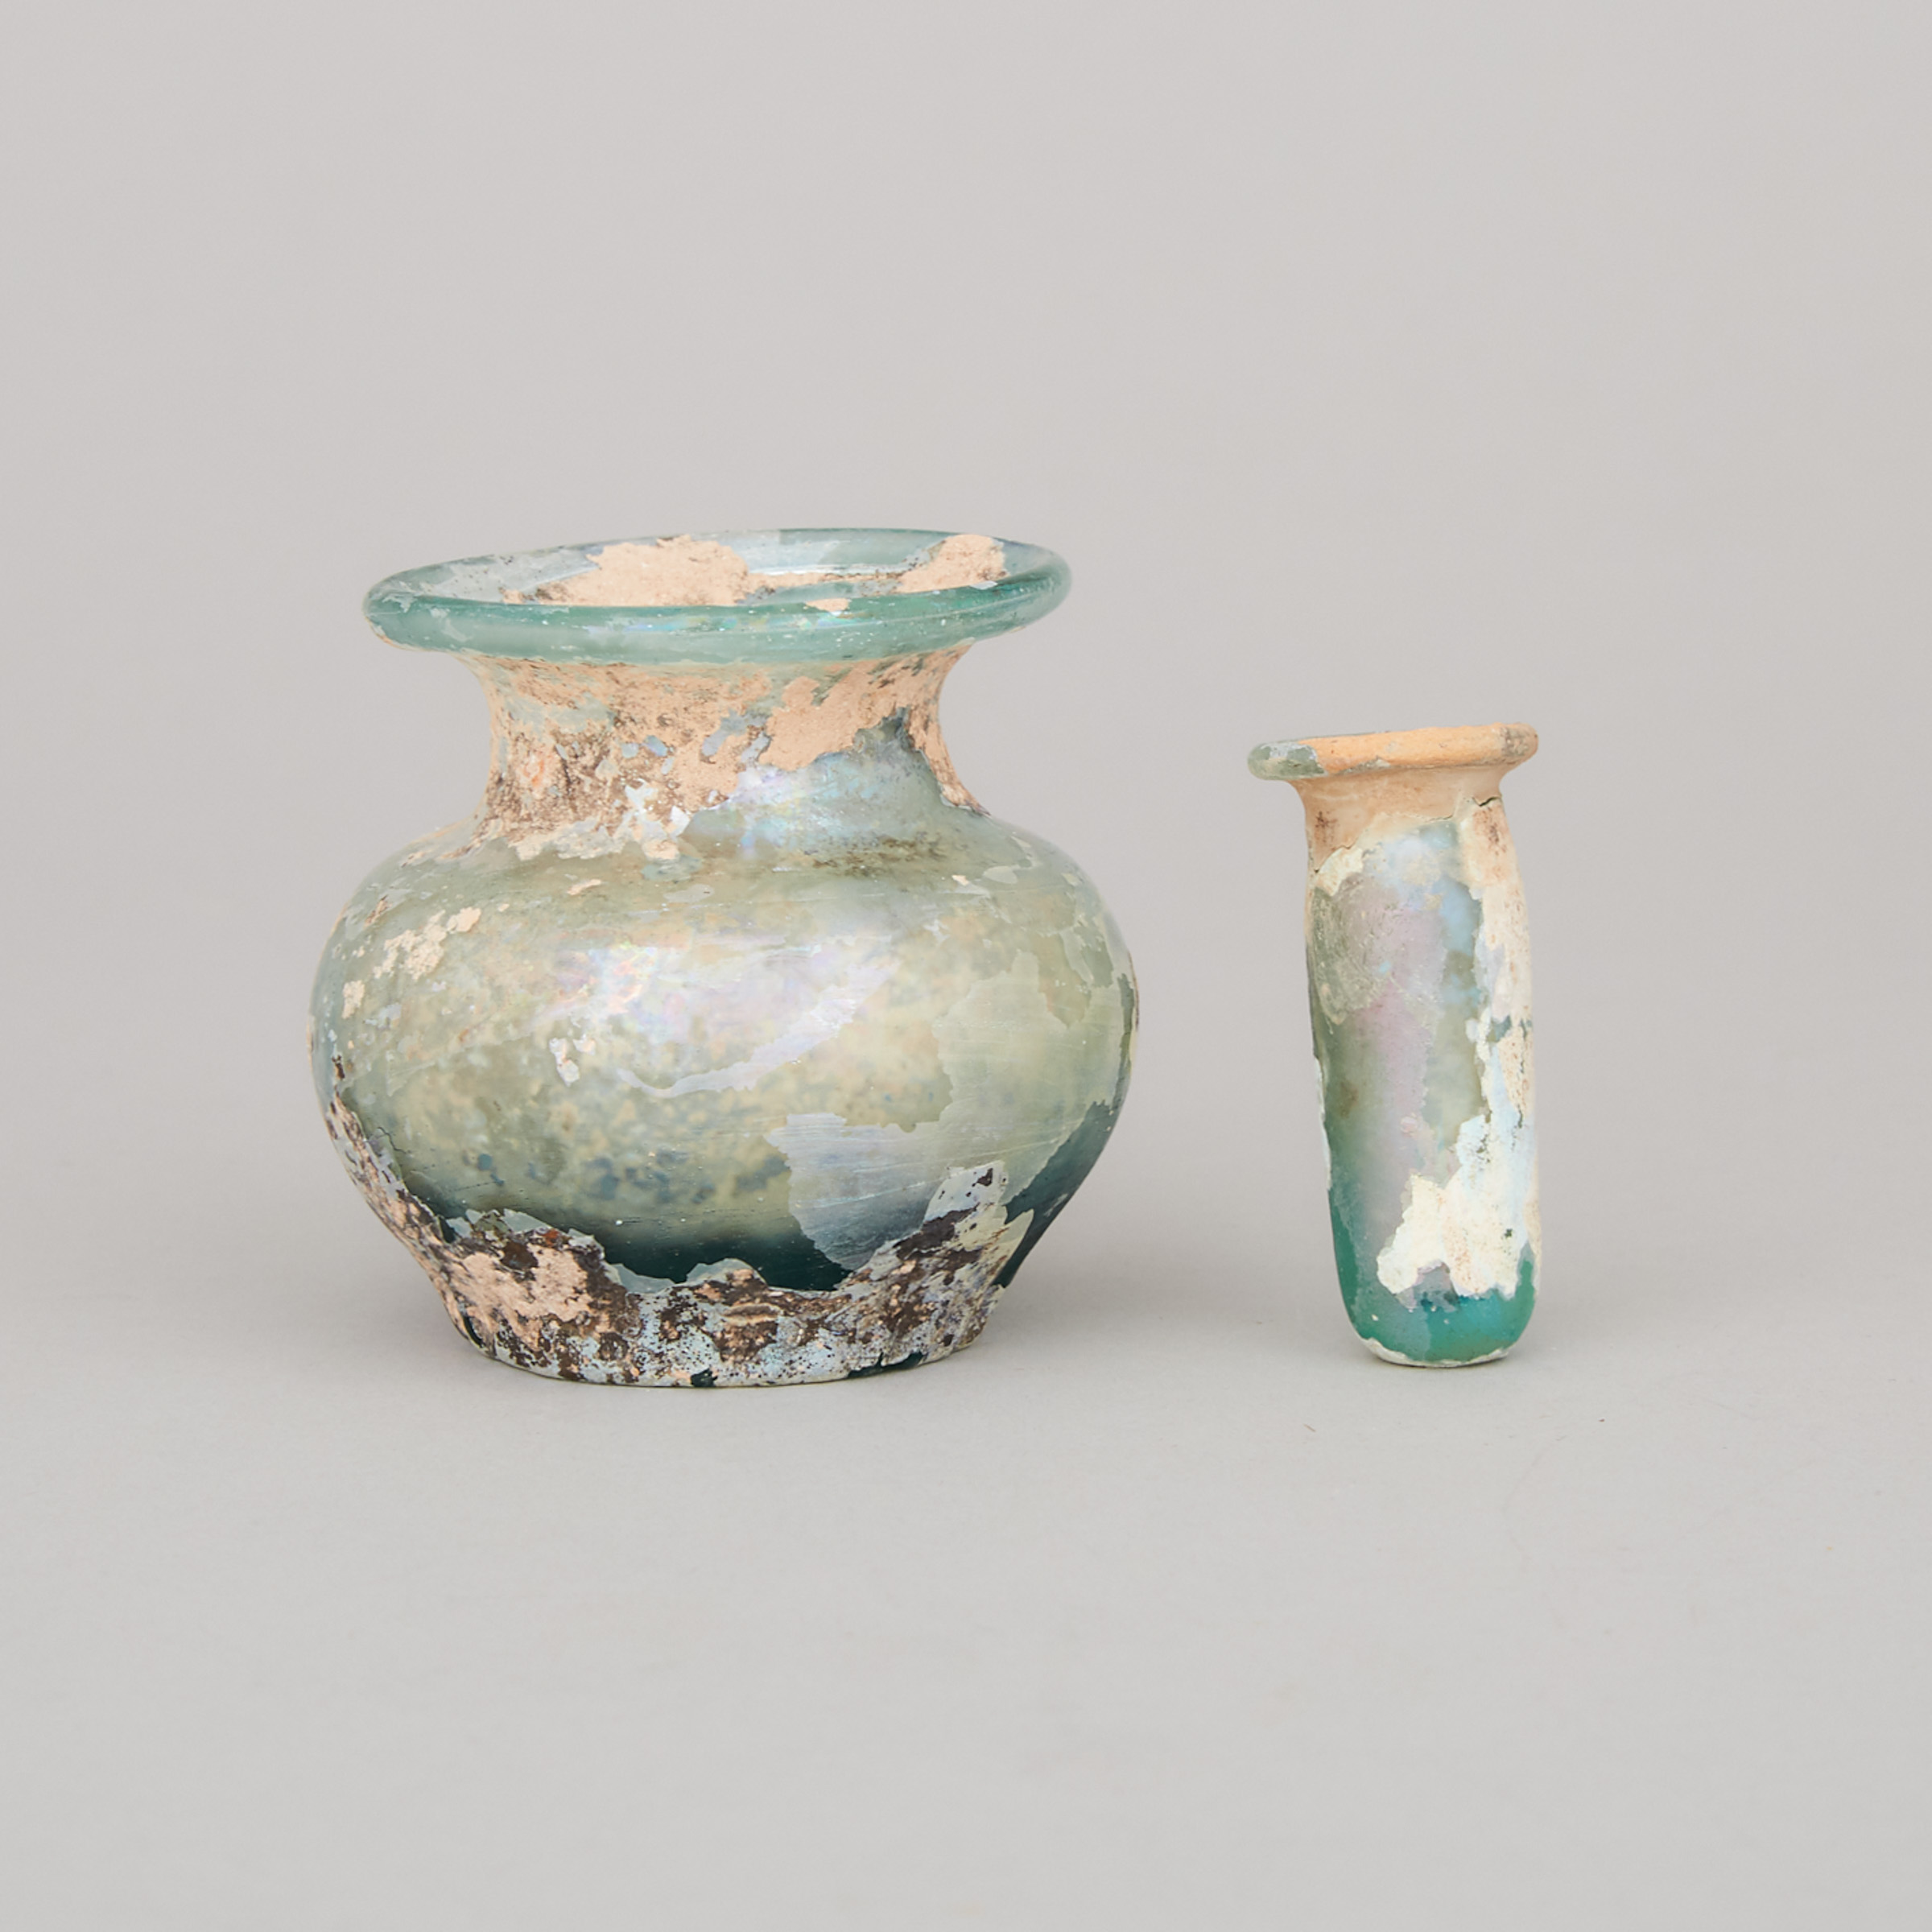 Two Pieces Roman Glass, 1st-2nd century A.D.